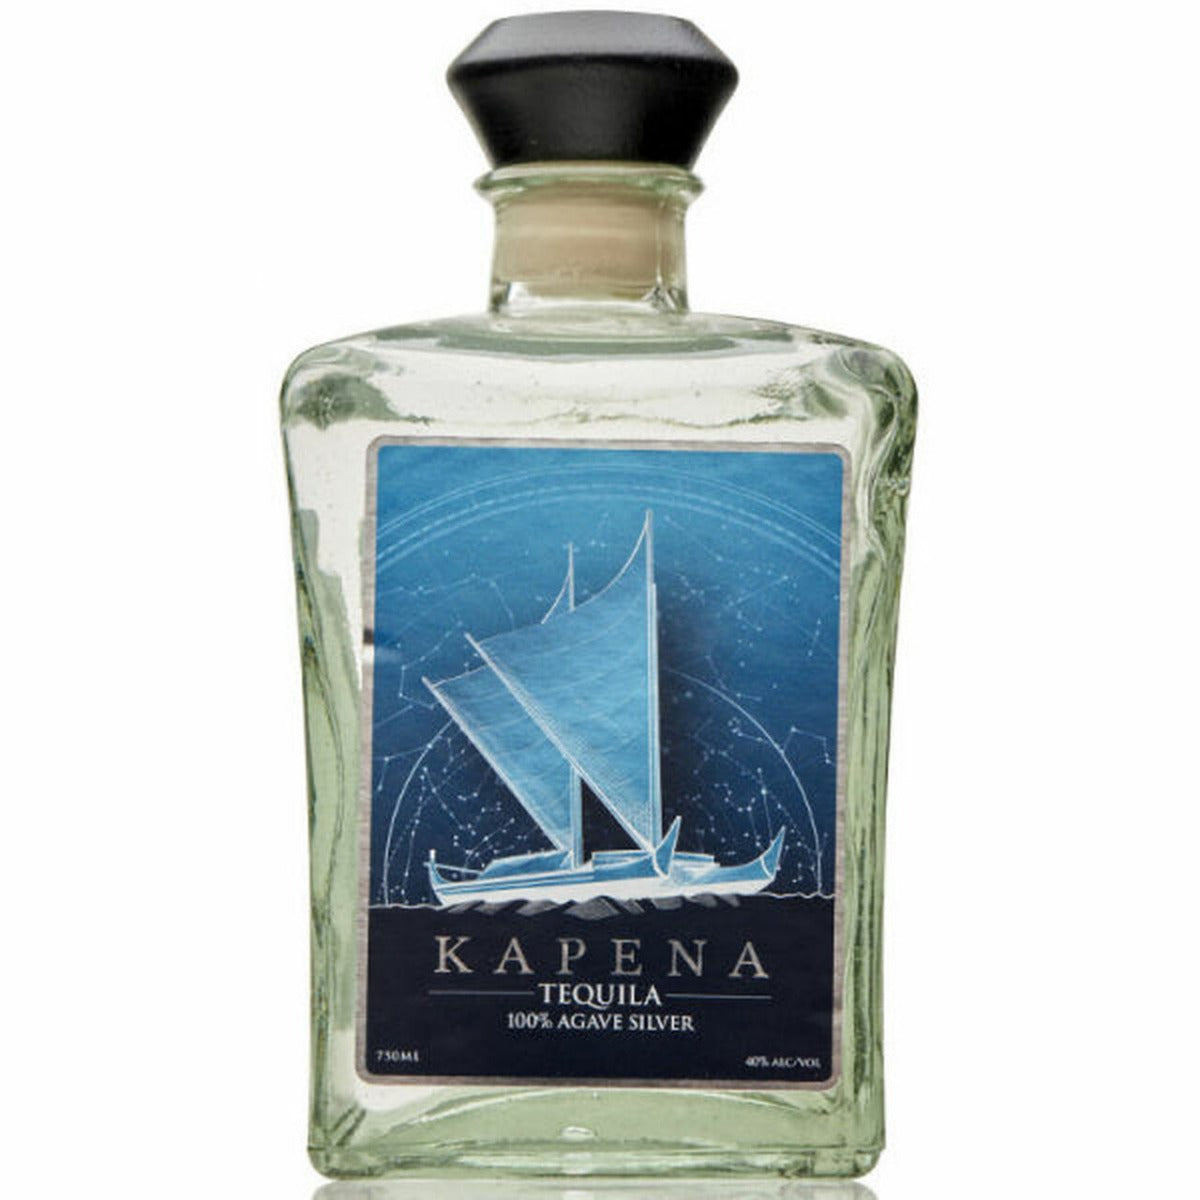 KAPENA TEQUILA SILVER INFUSED 750ML